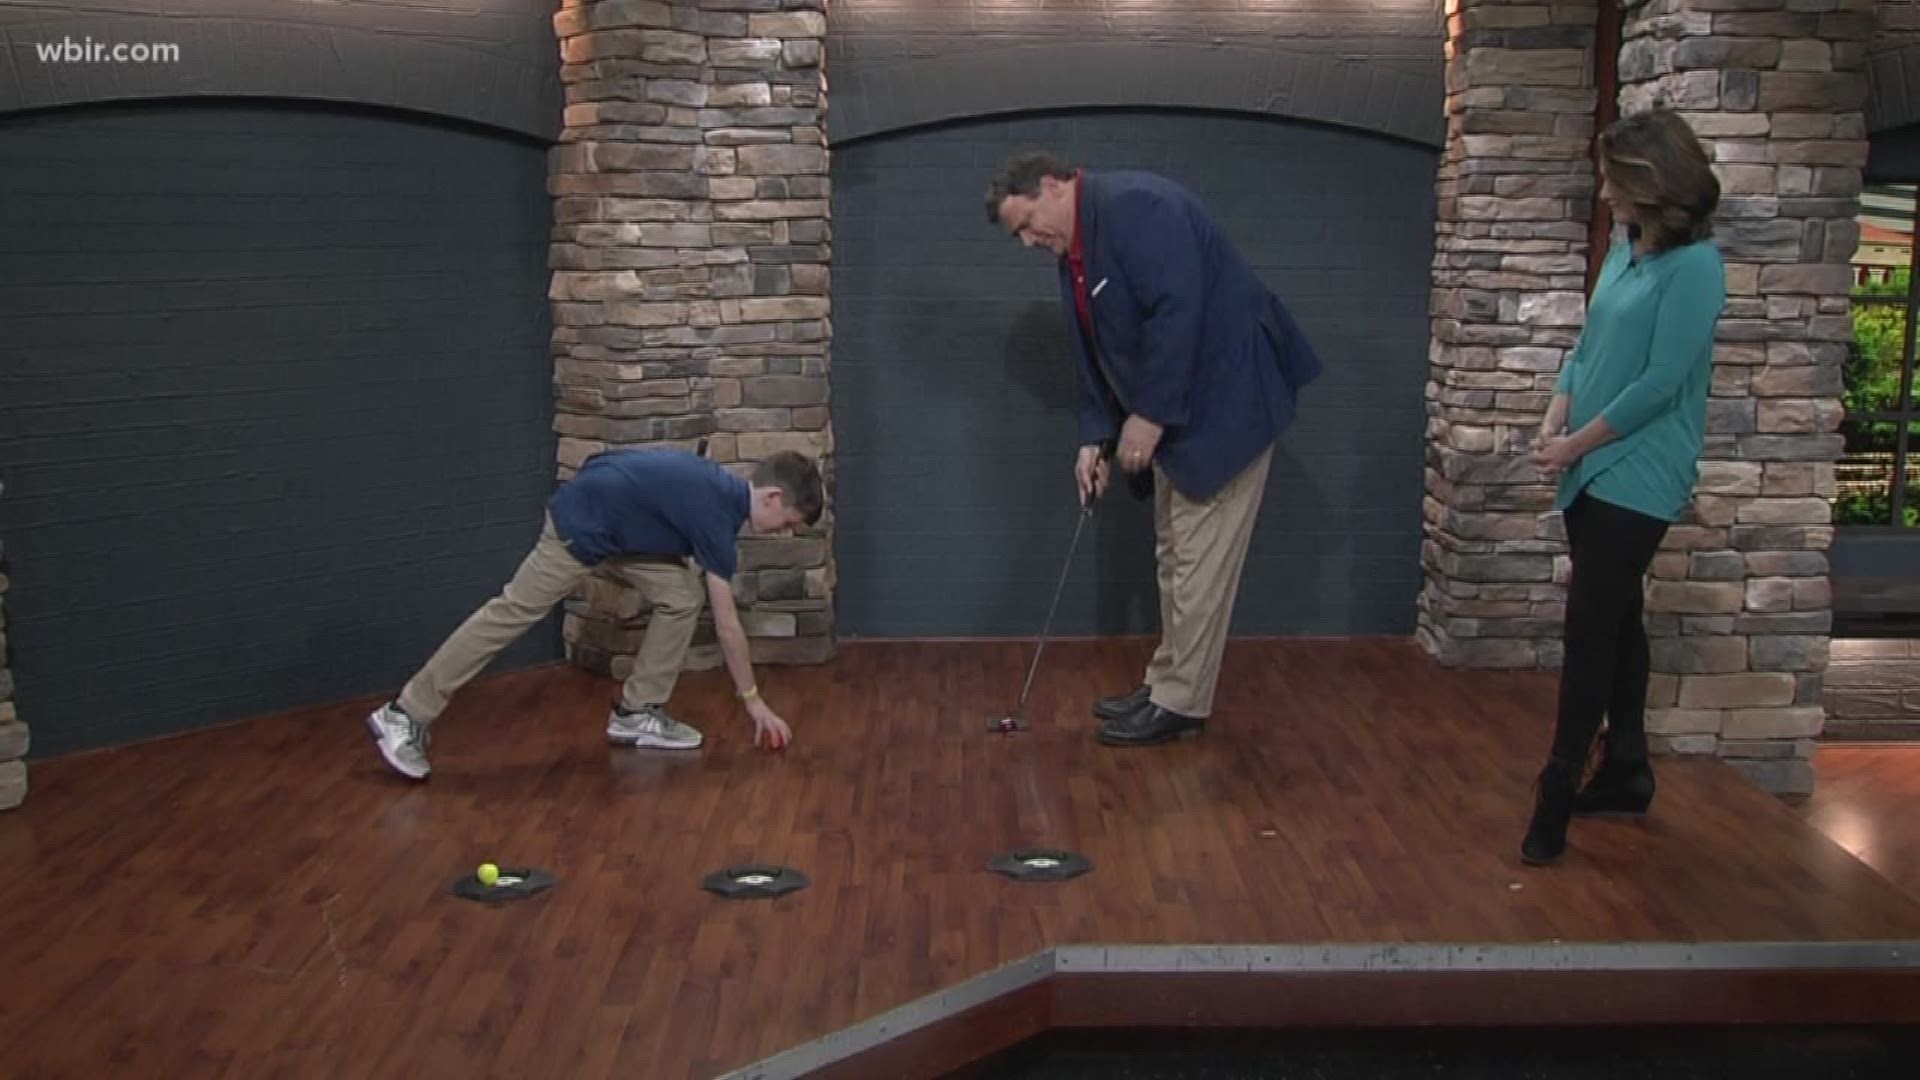 Junior Anchor Tate Shuler shares some putting tips with Russell Biven. Tate is incredibly talented at golf. Jan. 22, 2019-4pm